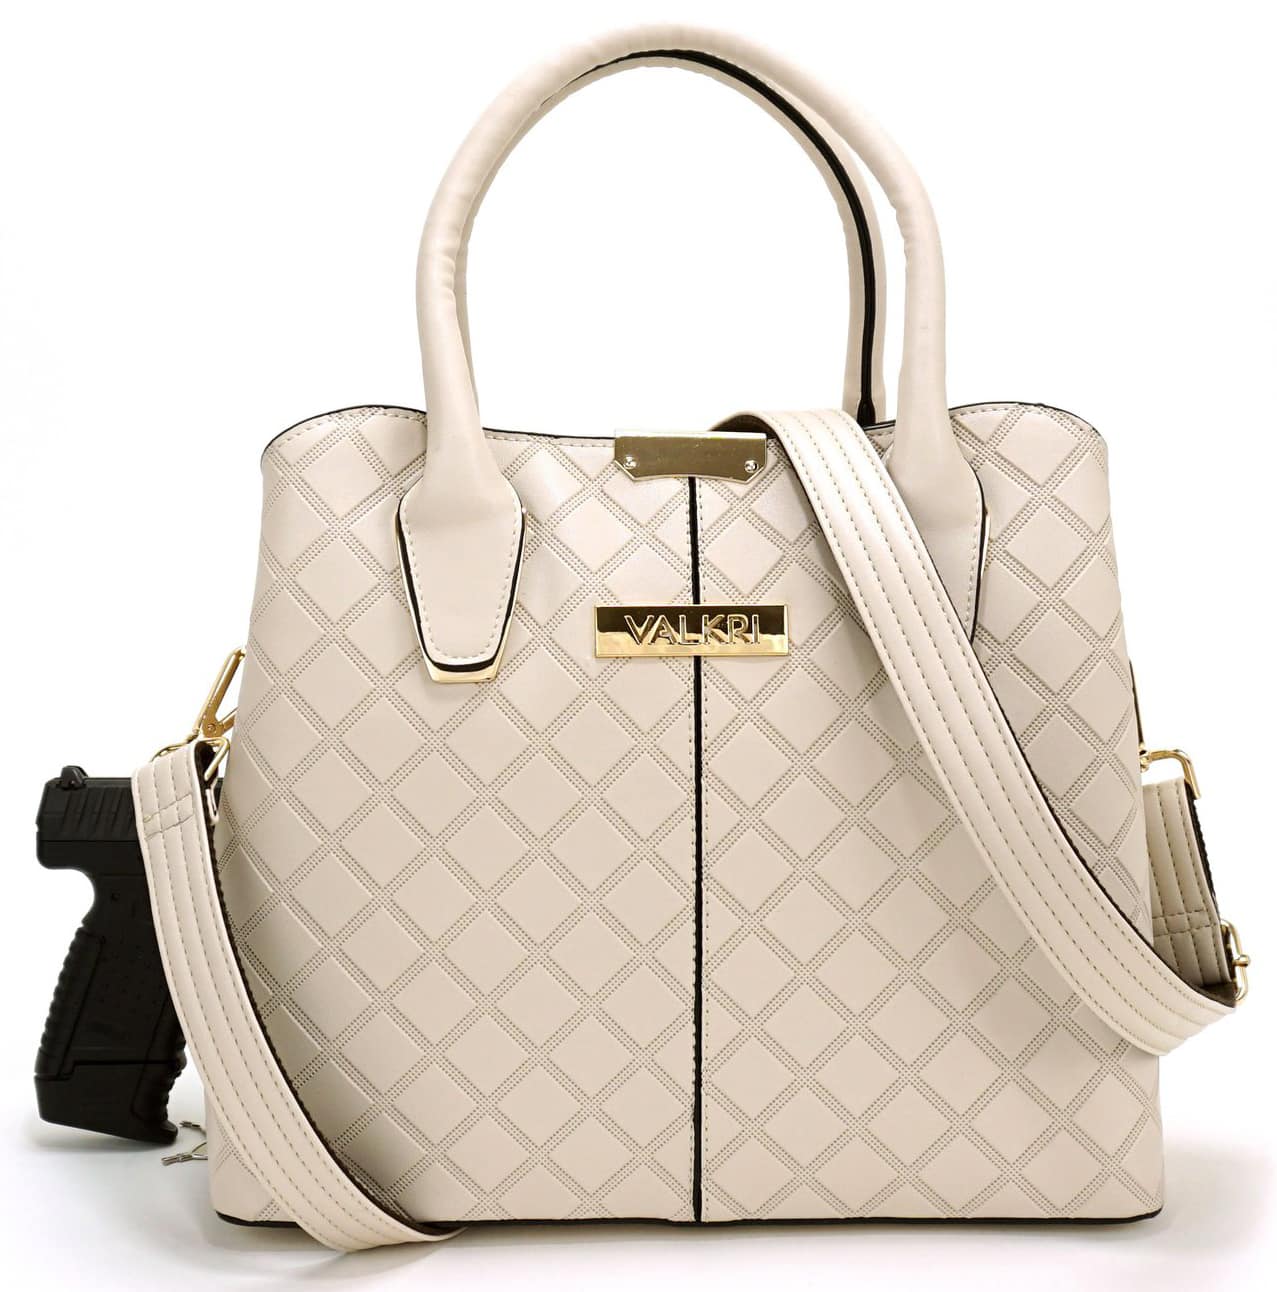 Stay safe without compromising style with Valkri's Juno concealed carry crossbody purse